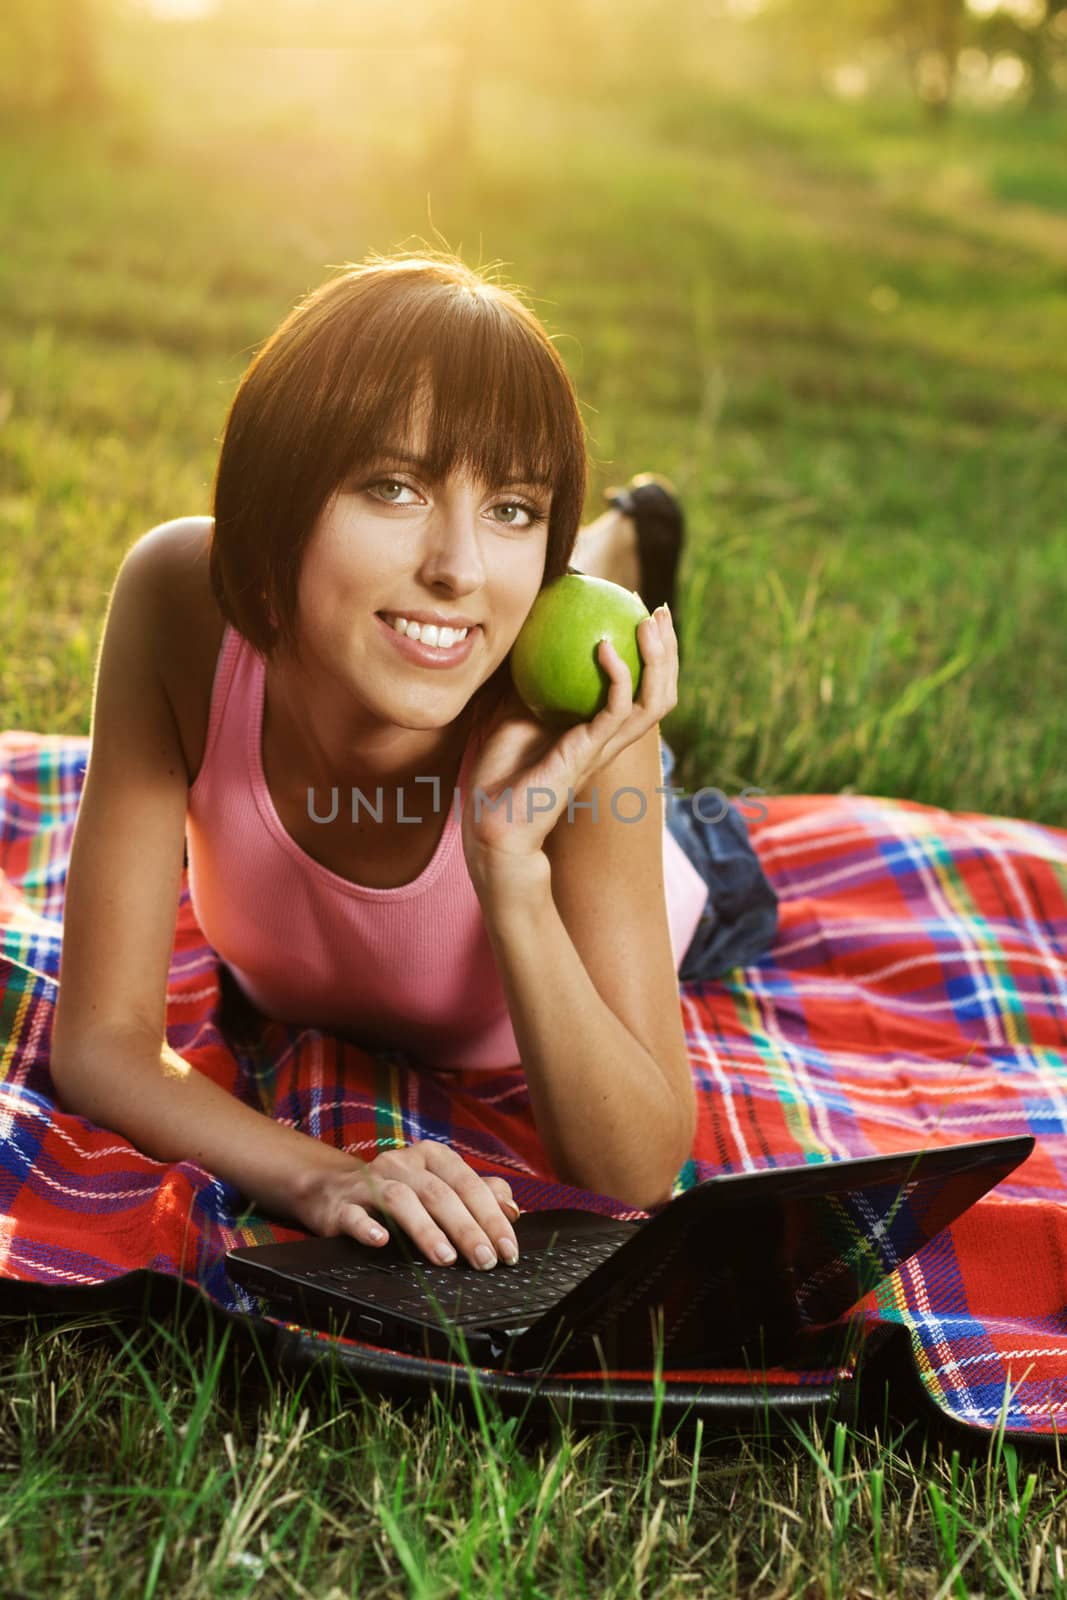 Lovely girl having a rest with laptop on picnic